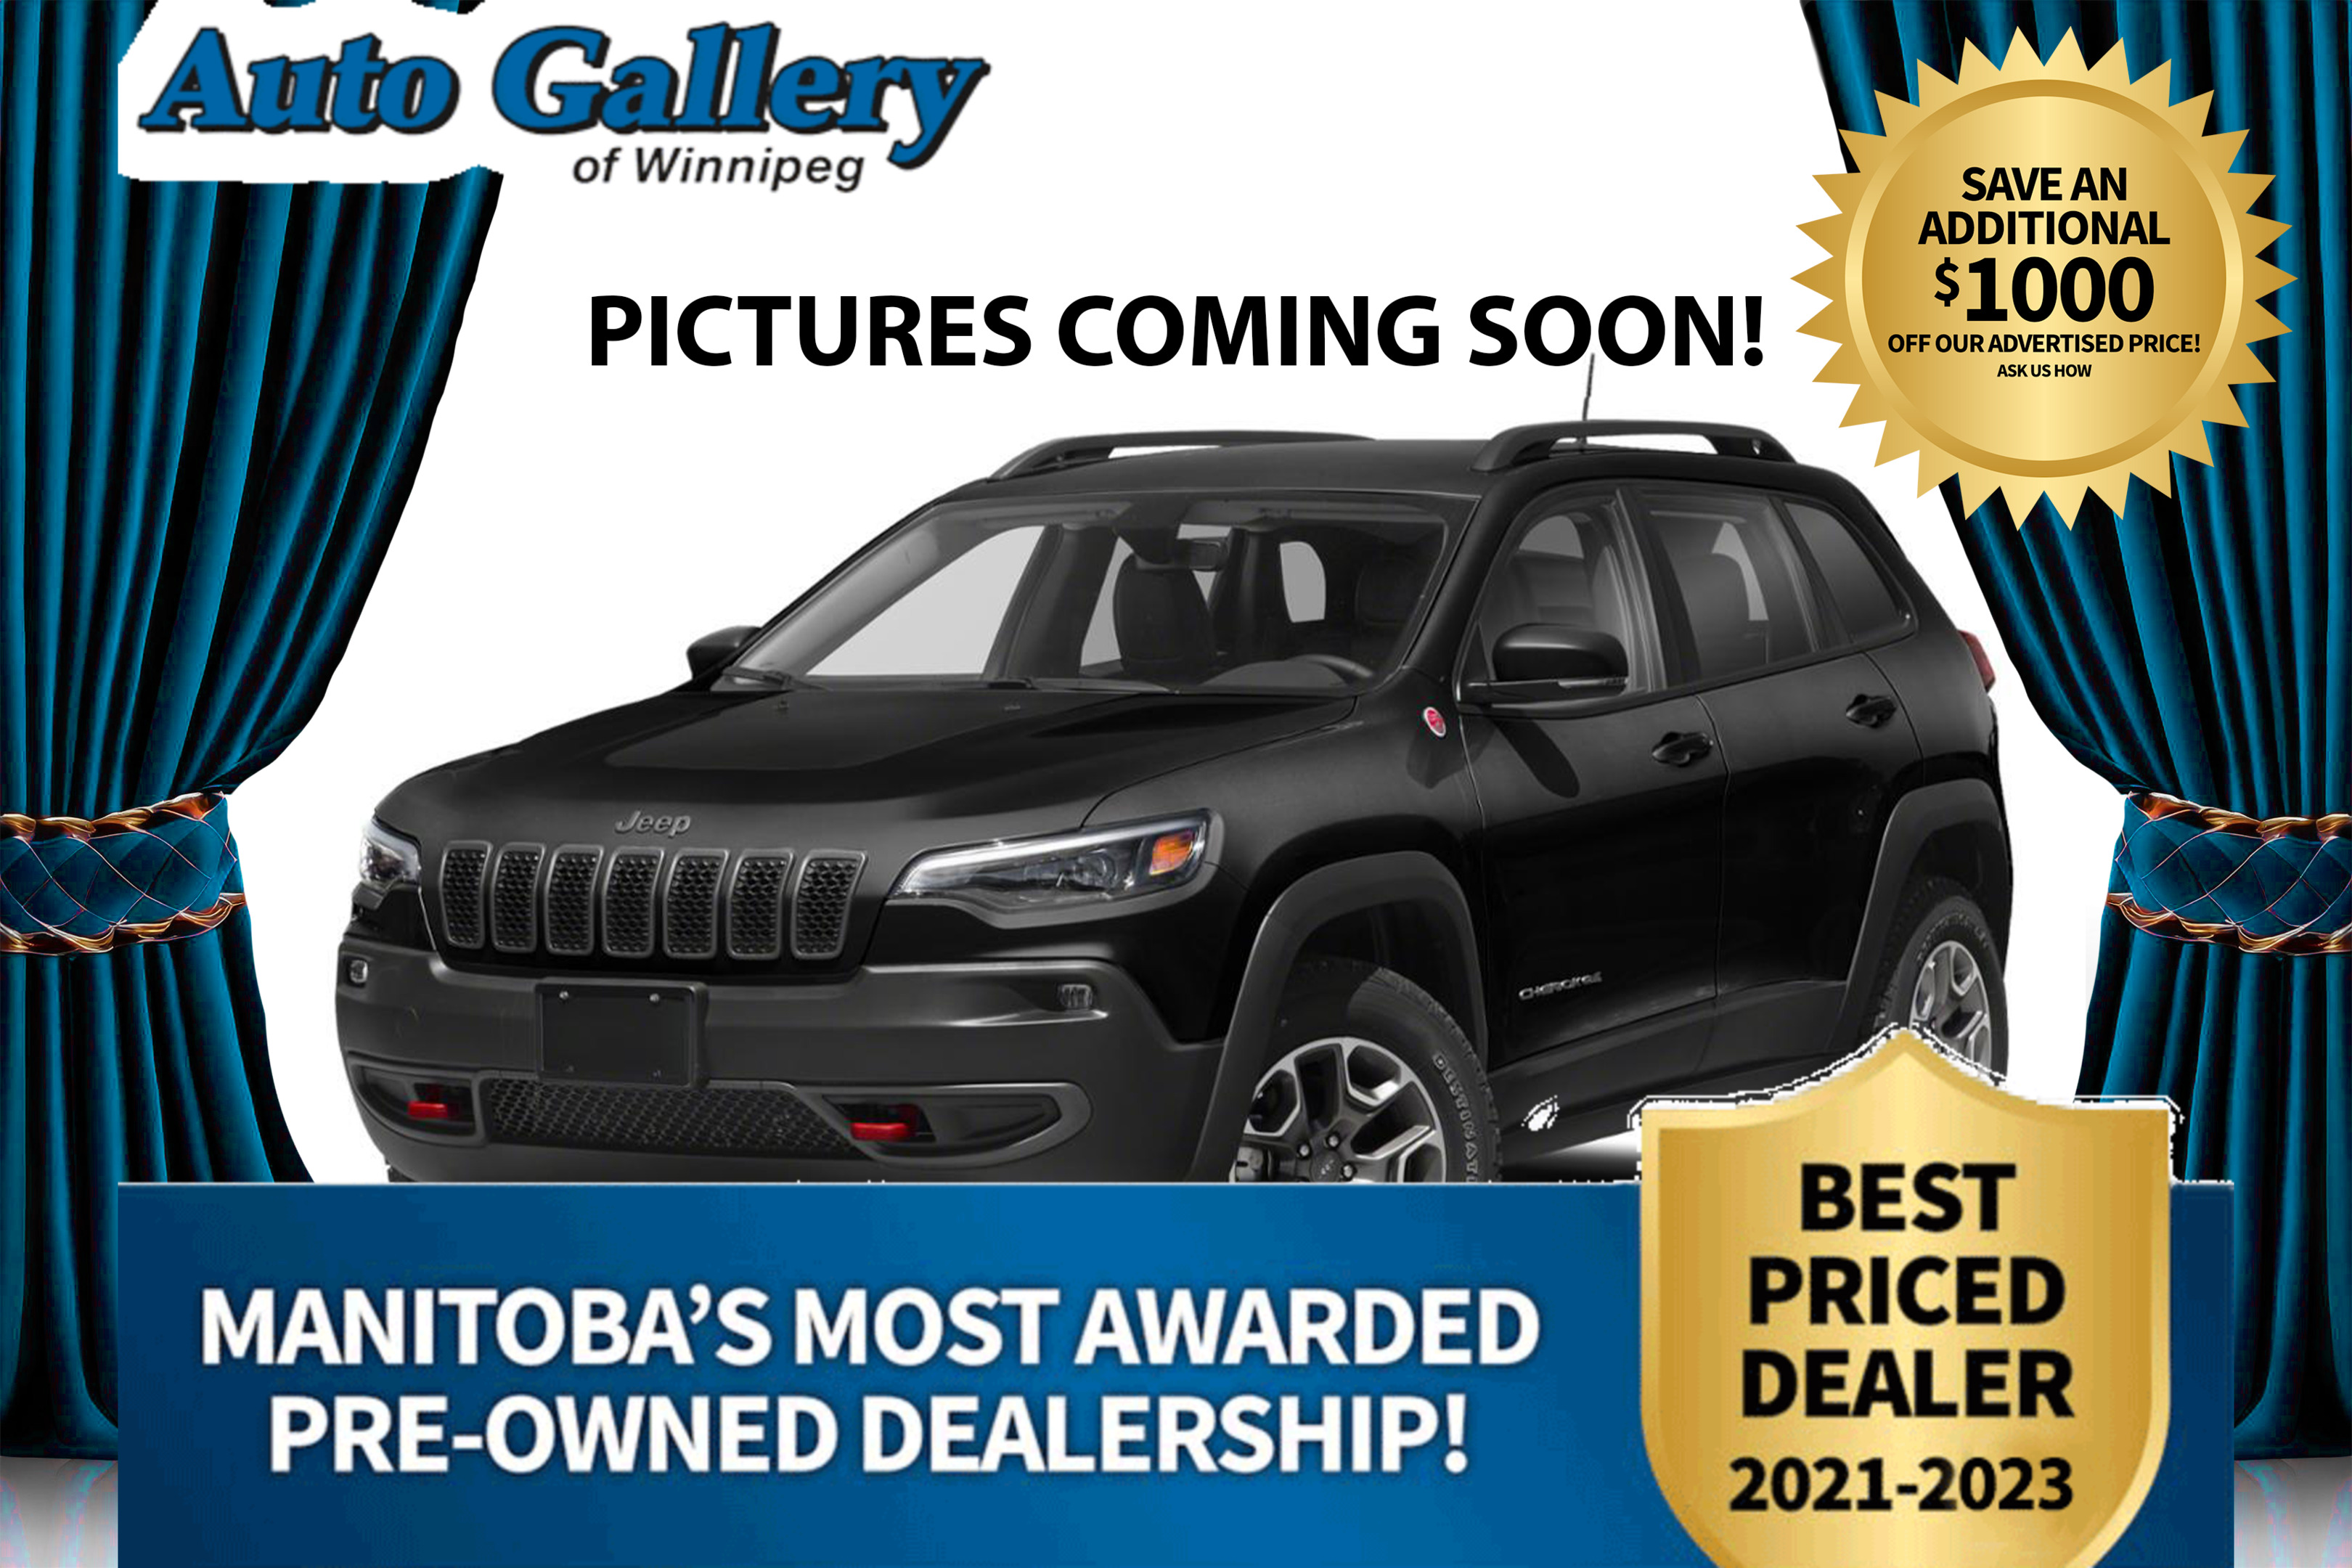 2022 Jeep Cherokee Trailhawk Elite 4x4, NAVI, HTD/CLD SEAT, PANO ROOF